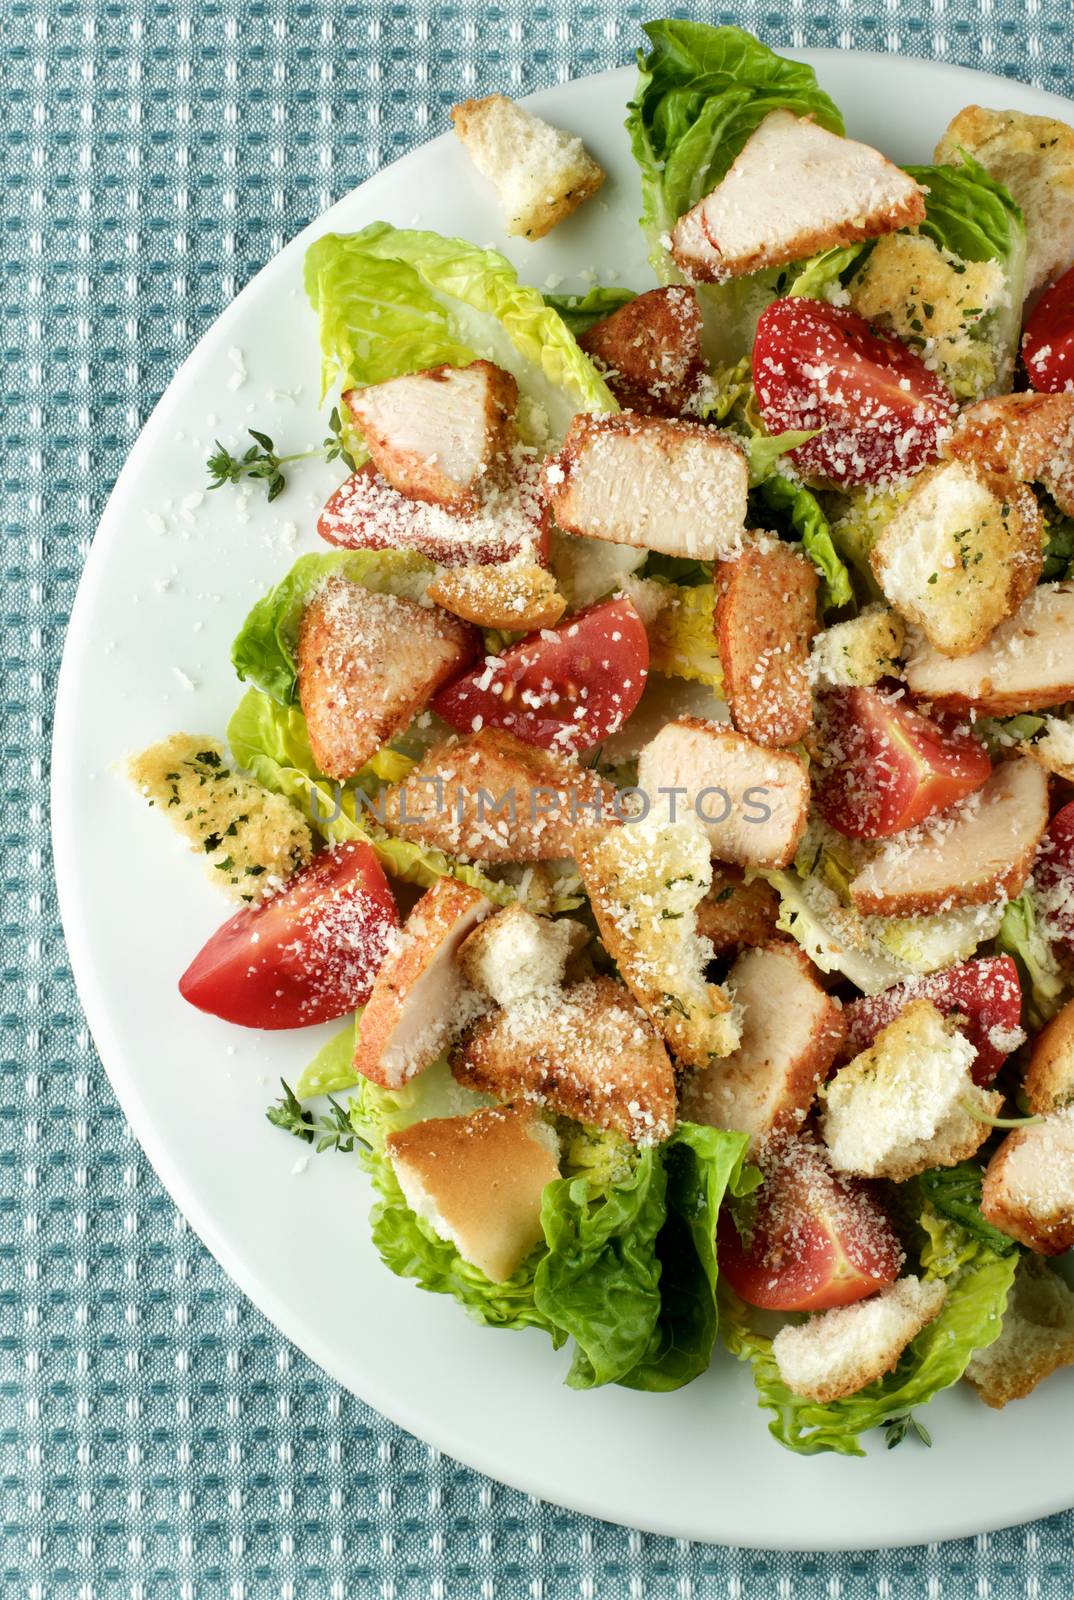 Delicious Caesar Salad with Roasted Chicken Breast, Garlic Crouton, Romaine Lettuce, Cherry Tomatoes and Grated Parmesan Cheese closeup on White Plate. Top View on Napkin